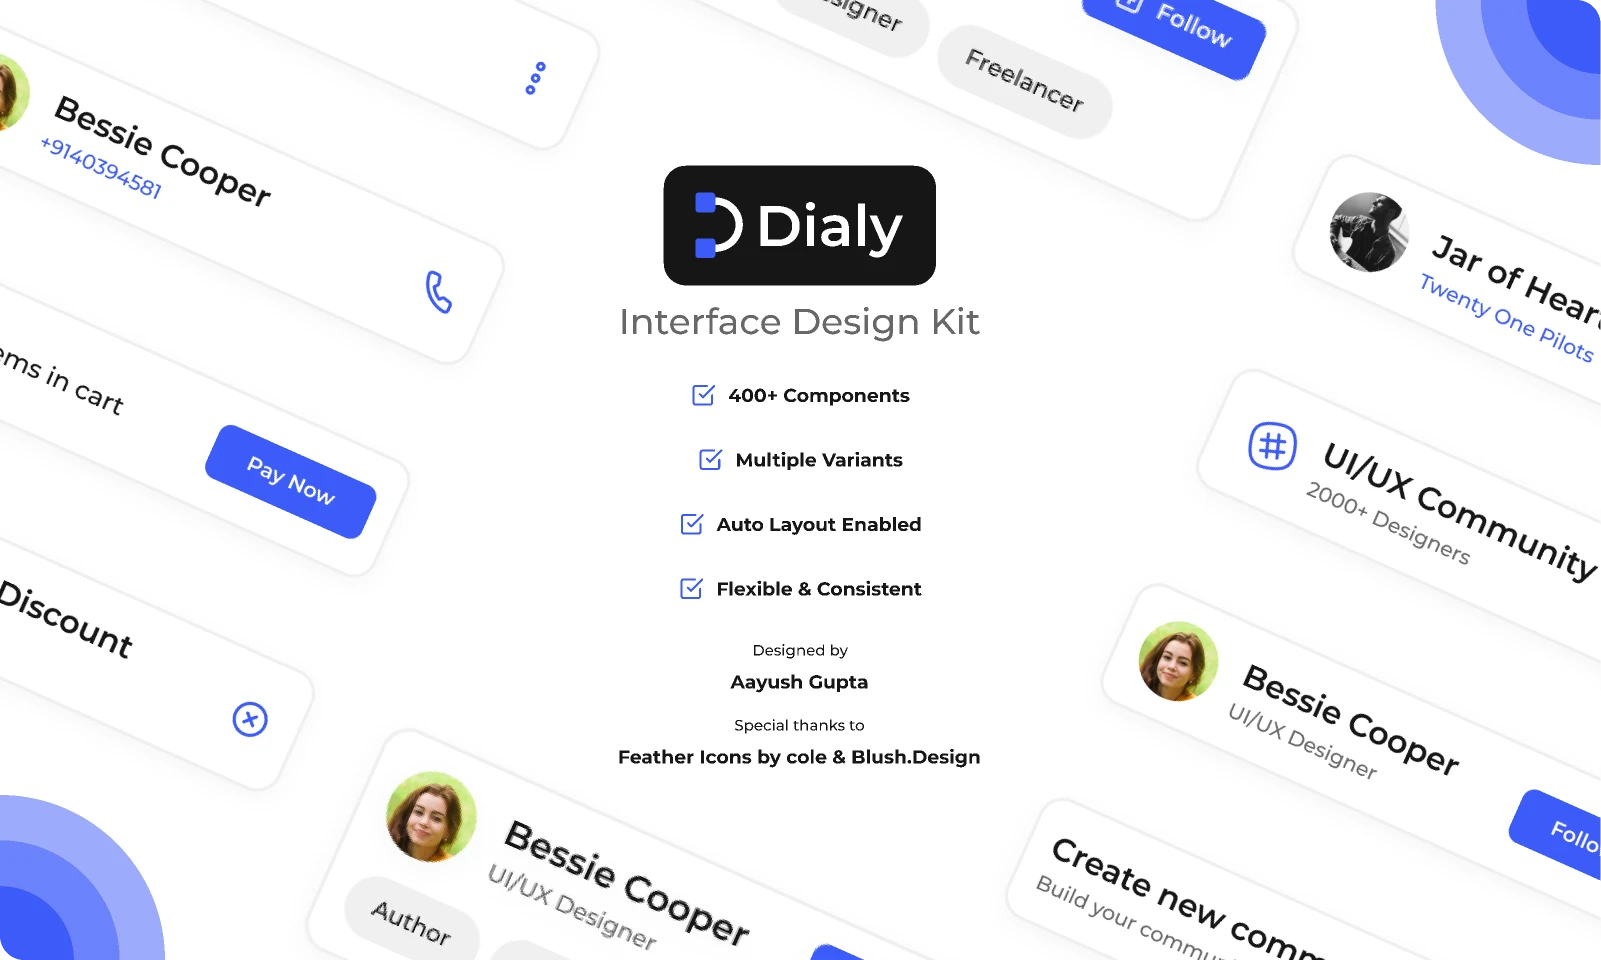 Dialy UI Kit | Free Mobile and Web Interface Design Kit for Figma and Adobe XD